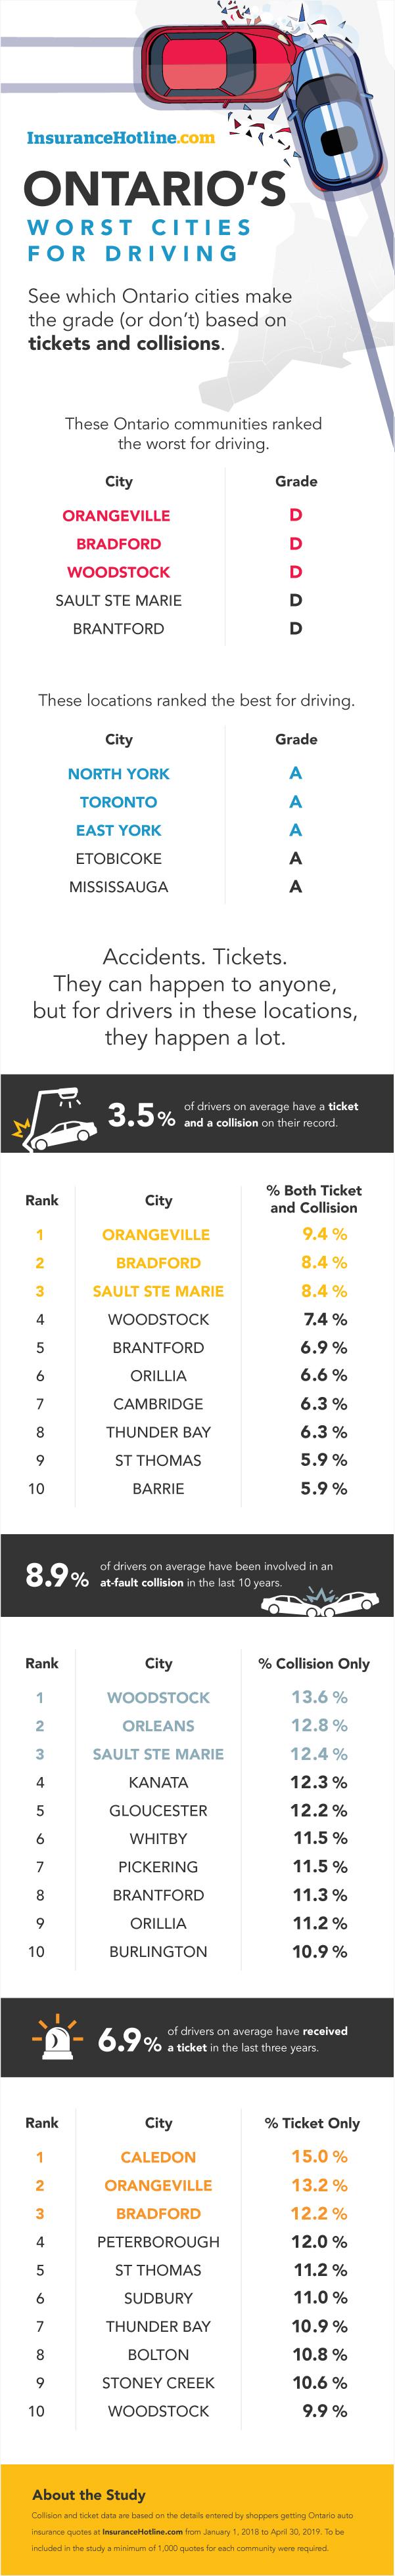 Infographic highlighting where Ontario&#x27;s worst cities for driving are as well as the best.